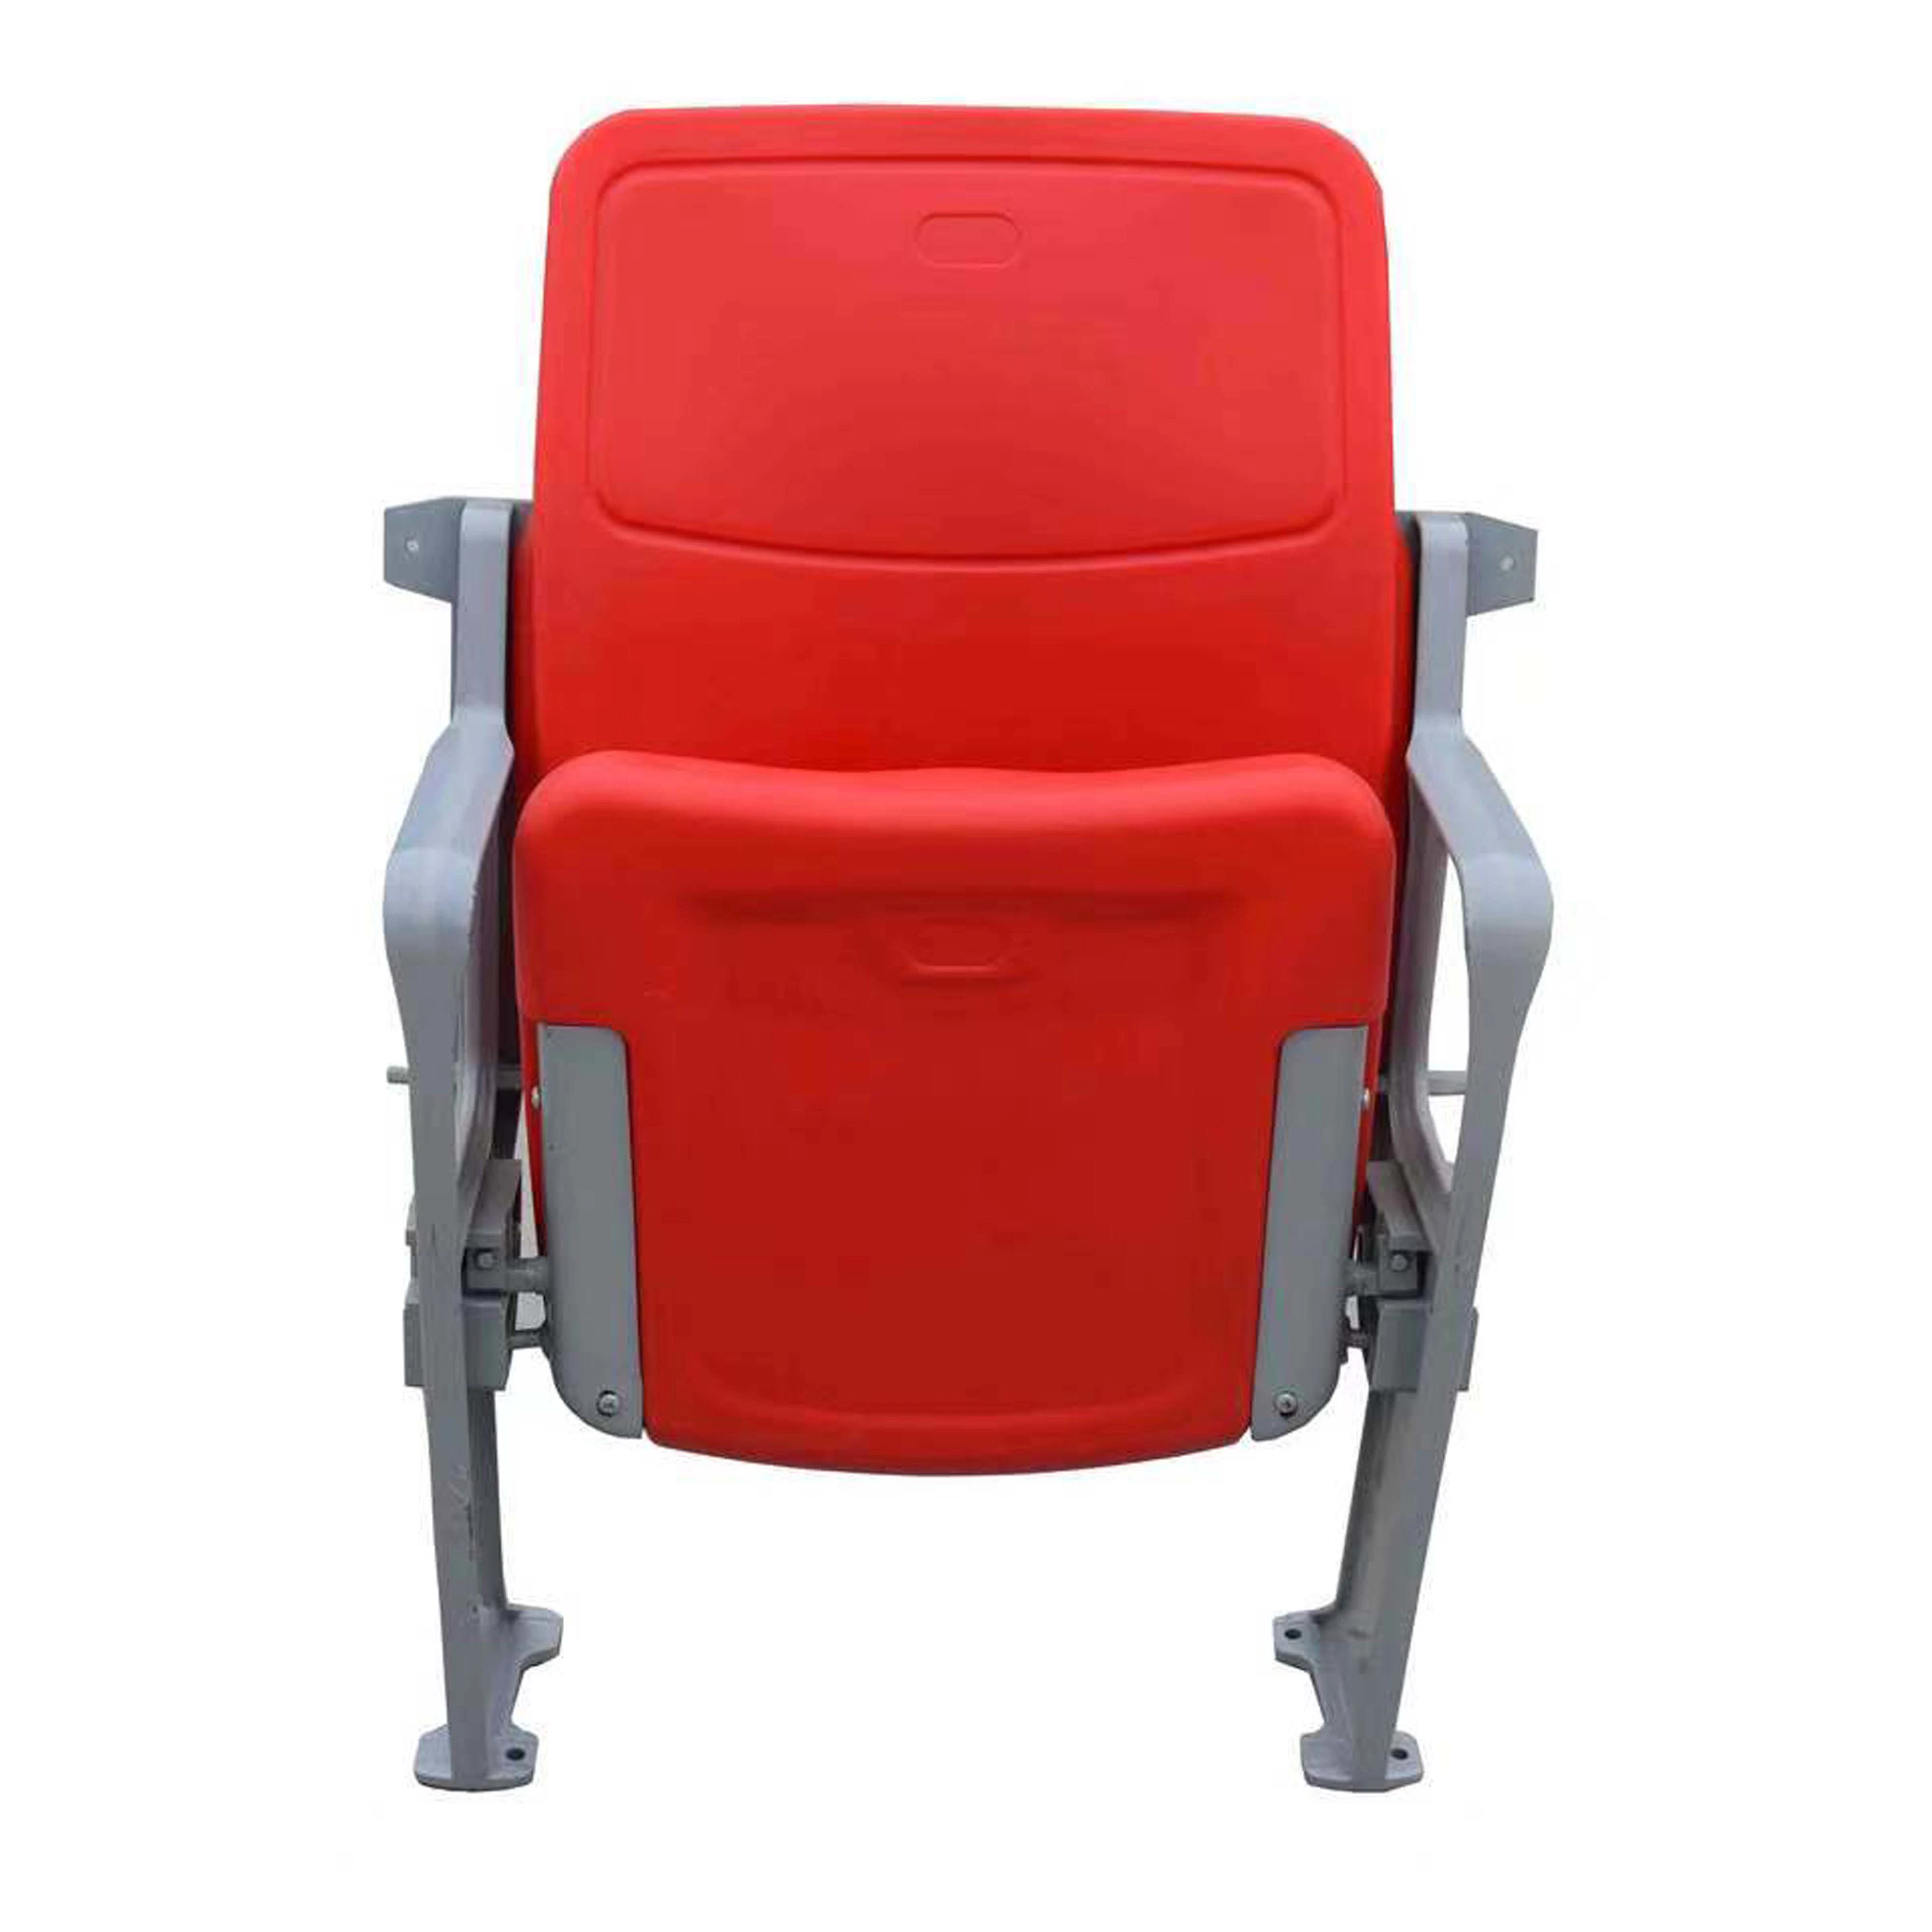 Customizable Plastic Folding Stadium Chair / Seats with Armrest for Events and Outdoor Sports